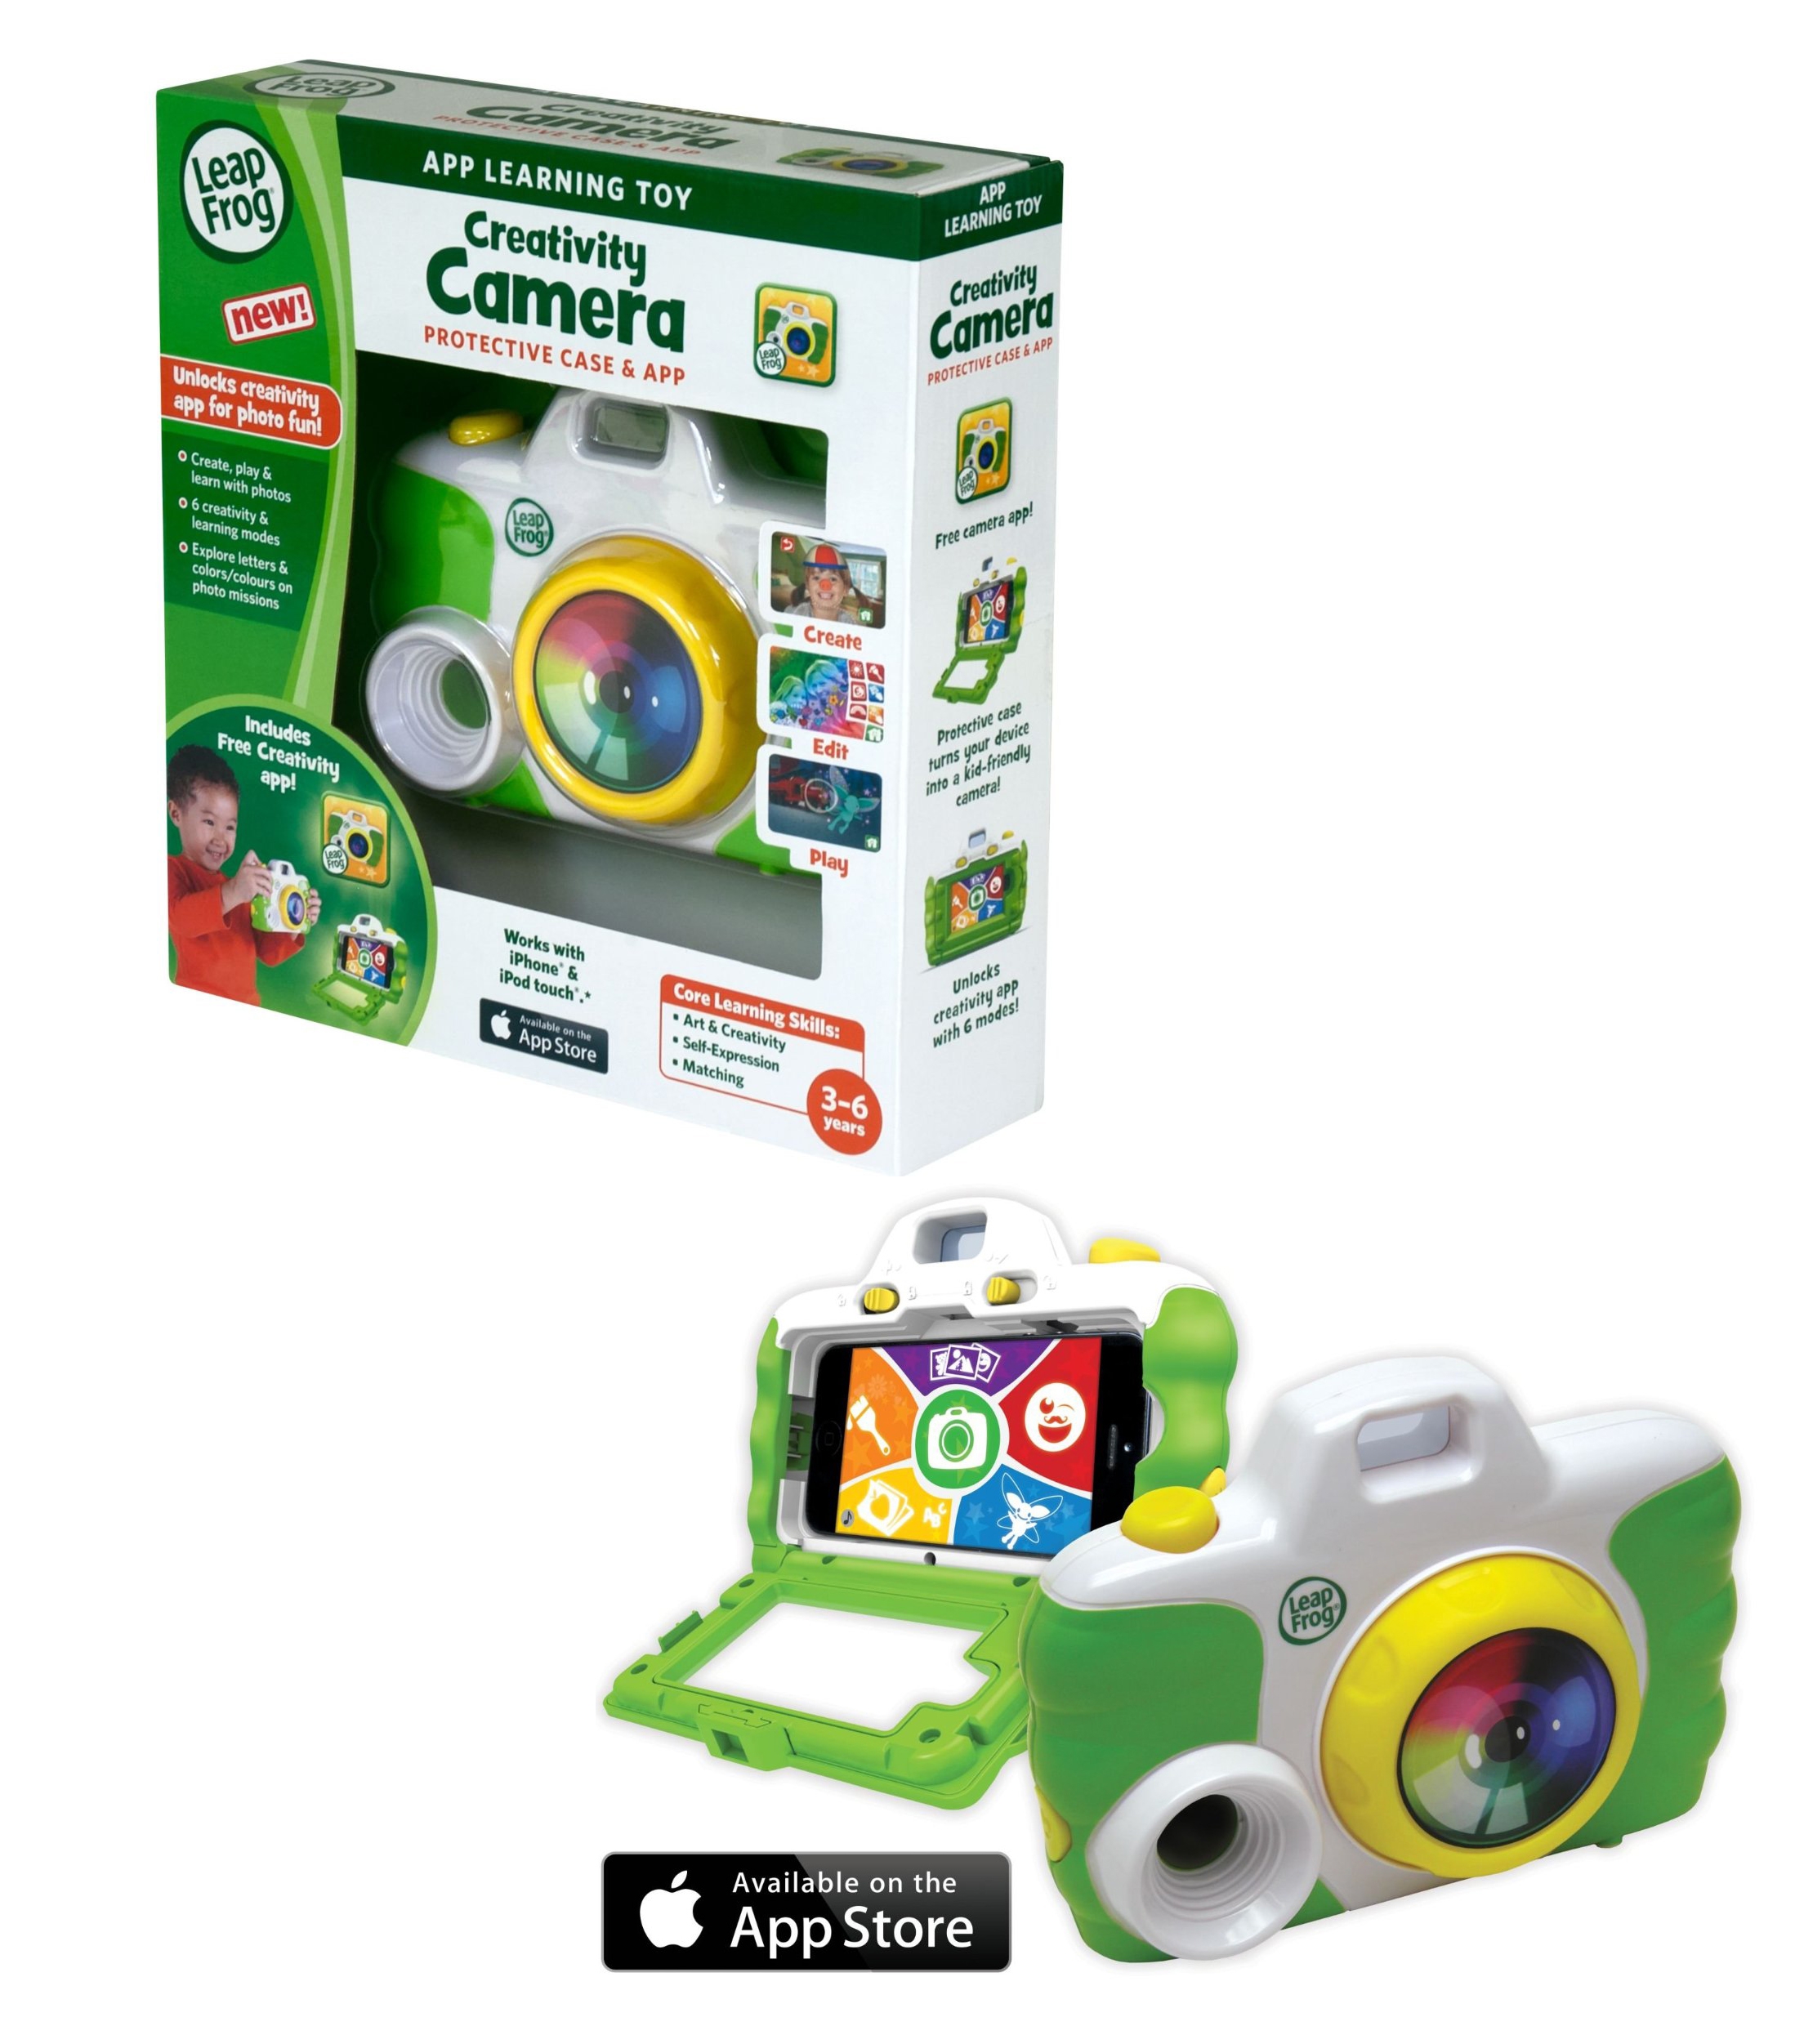 Leap Frog 'Creative Camera' with Protective Case App Learning Toy